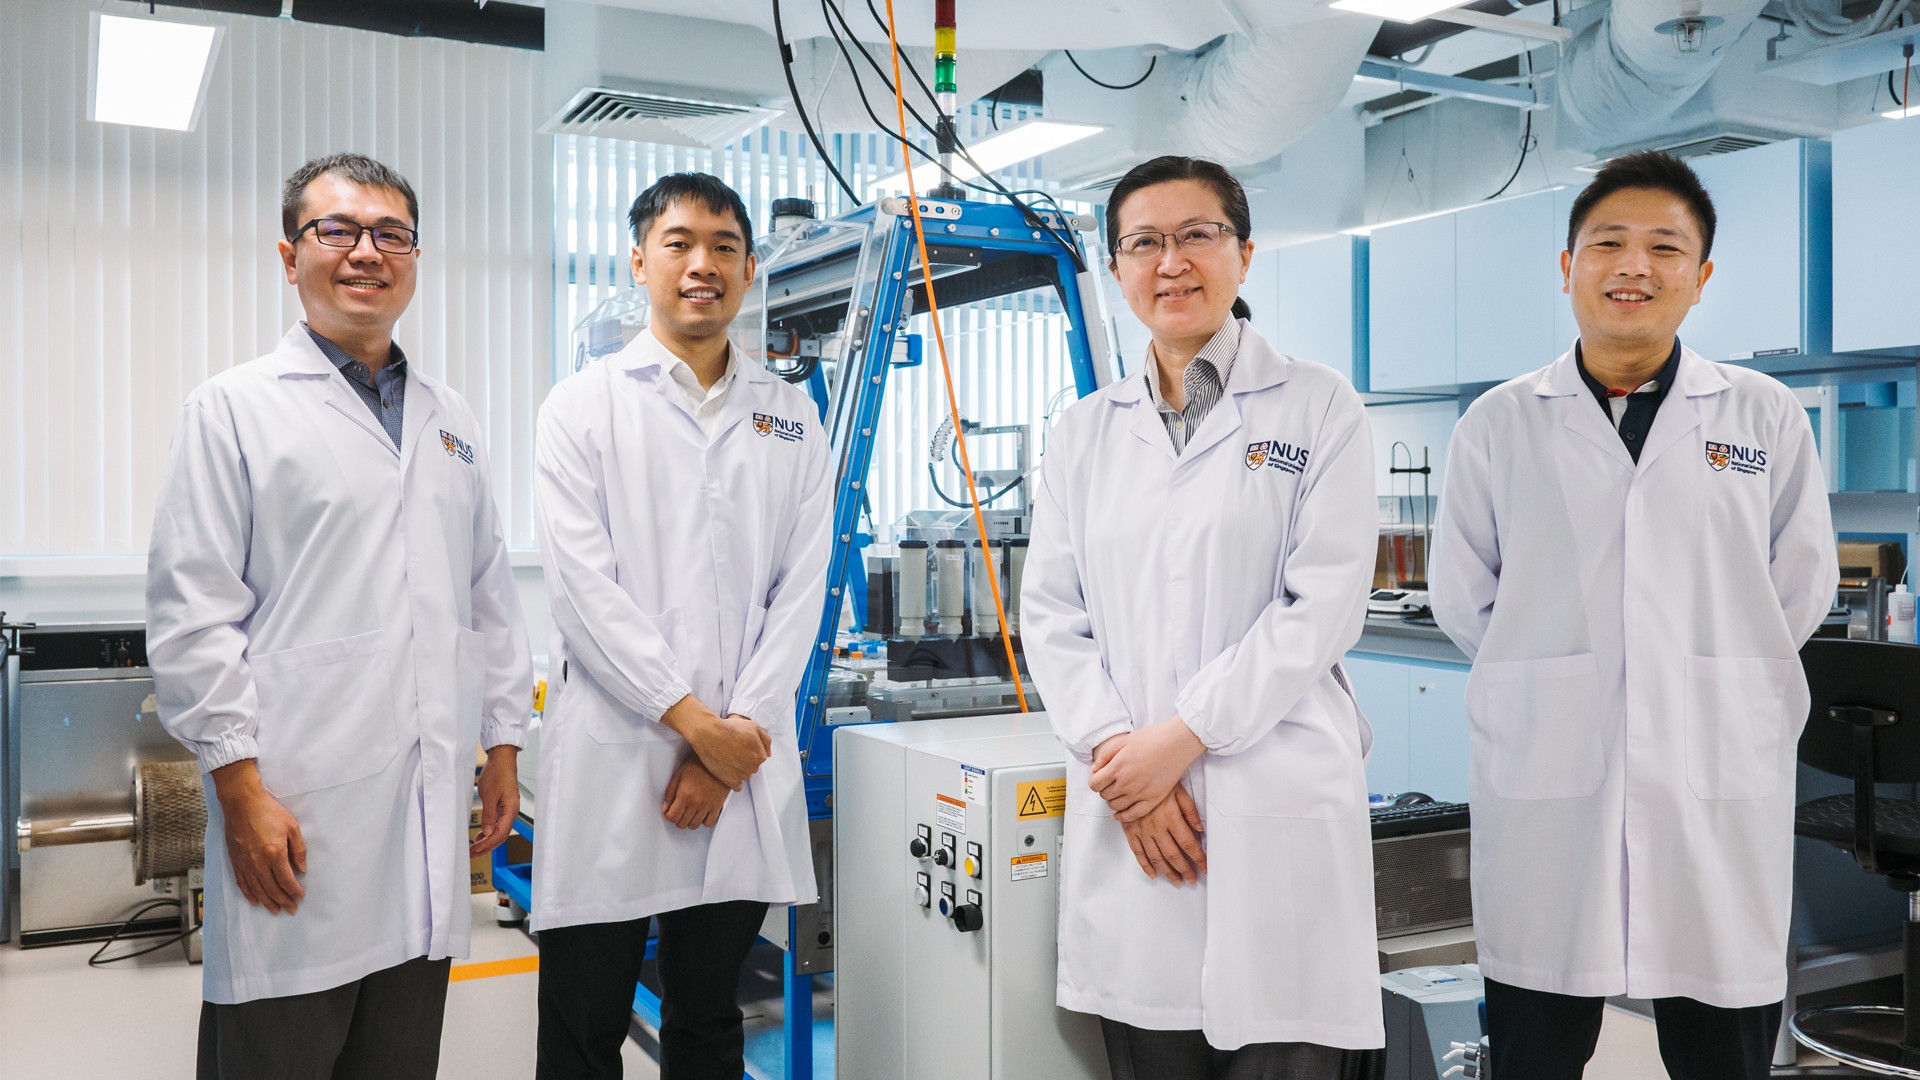 Prof Liu Bin (second from right), who is the Director of the NUS Centre for Hydrogen Innovations, with researchers who will be leading groundbreaking hydrogen-related research at the new centre.